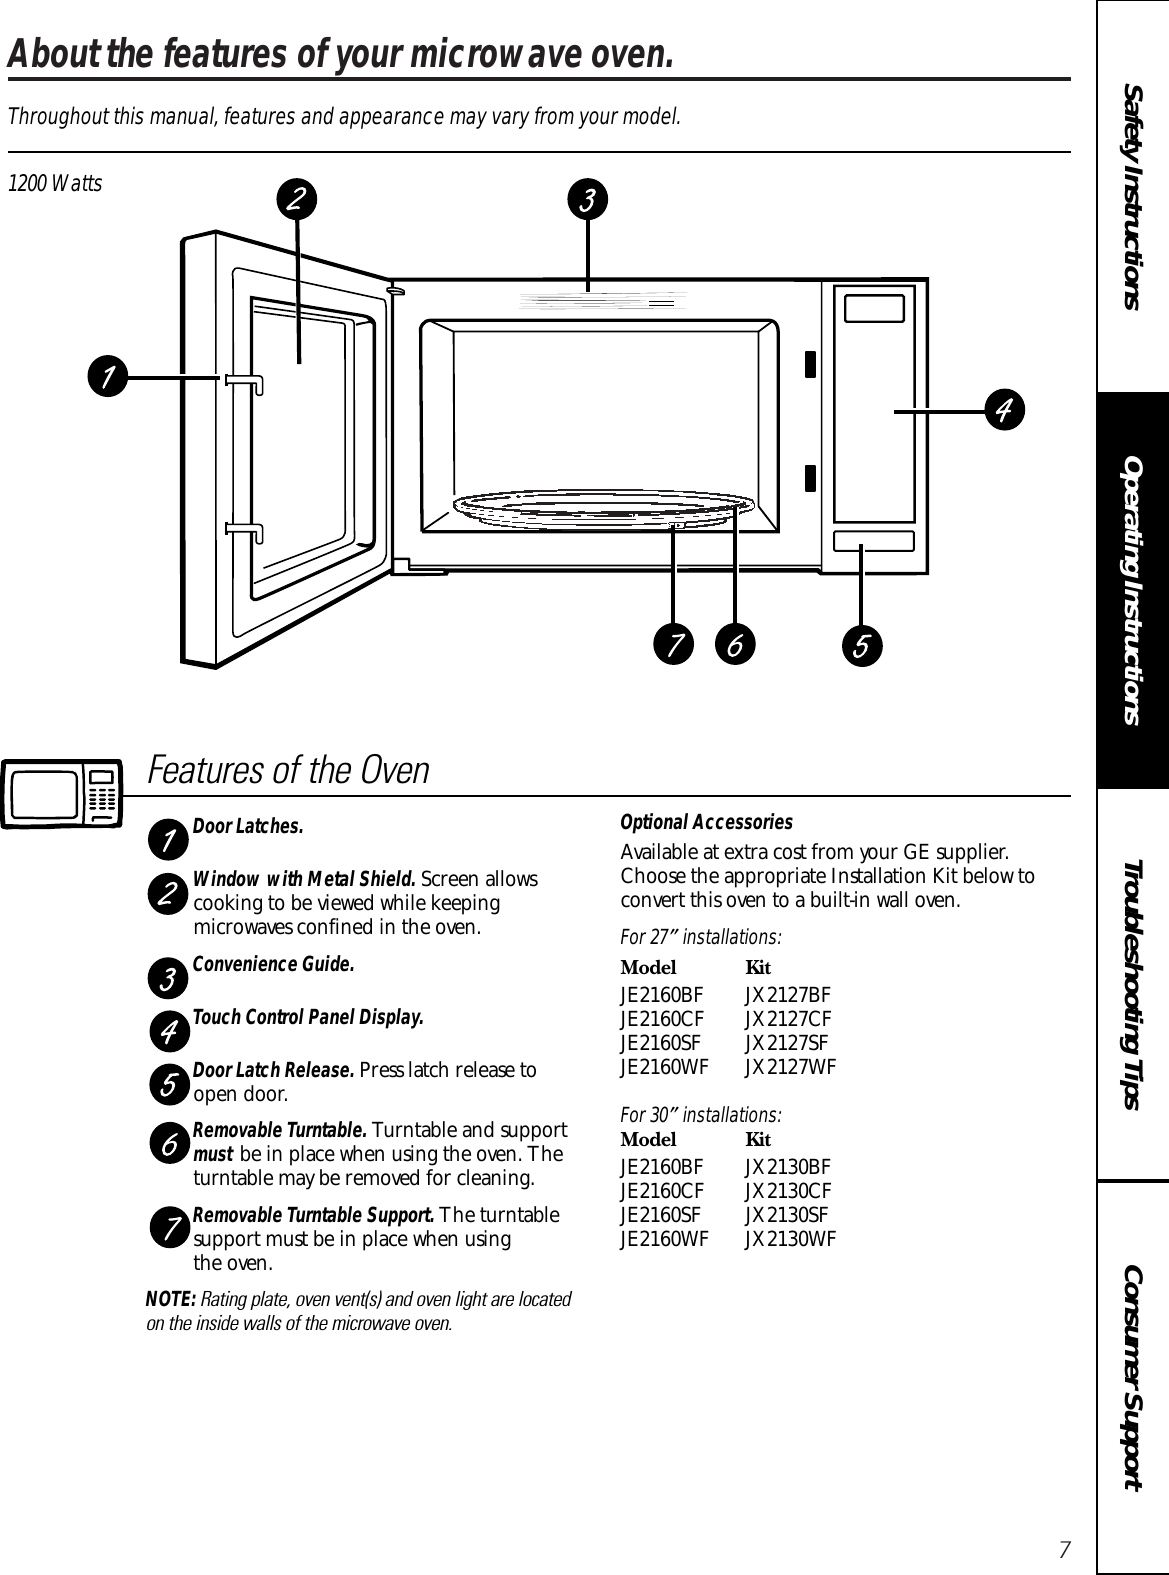 7About the features of your microwave oven. Consumer SupportTroubleshooting TipsOperating InstructionsSafety InstructionsThroughout this manual, features and appearance may vary from your model.1200 WattsFeatures of the OvenDoor Latches.Window with Metal Shield. Screen allowscooking to be viewed while keepingmicrowaves confined in the oven.Convenience Guide.Touch Control Panel Display.Door Latch Release. Press latch release to open door.Removable Turntable. Turntable and supportmust be in place when using the oven. Theturntable may be removed for cleaning.Removable Turntable Support. The turntablesupport must be in place when using the oven.NOTE: Rating plate, oven vent(s) and oven light are located on the inside walls of the microwave oven.Optional AccessoriesAvailable at extra cost from your GE supplier.Choose the appropriate Installation Kit below toconvert this oven to a built-in wall oven.For 27″installations:Model KitJE2160BF JX2127BFJE2160CF JX2127CFJE2160SF JX2127SFJE2160WF JX2127WFFor 30″installations:Model KitJE2160BF JX2130BFJE2160CF JX2130CFJE2160SF JX2130SFJE2160WF JX2130WF